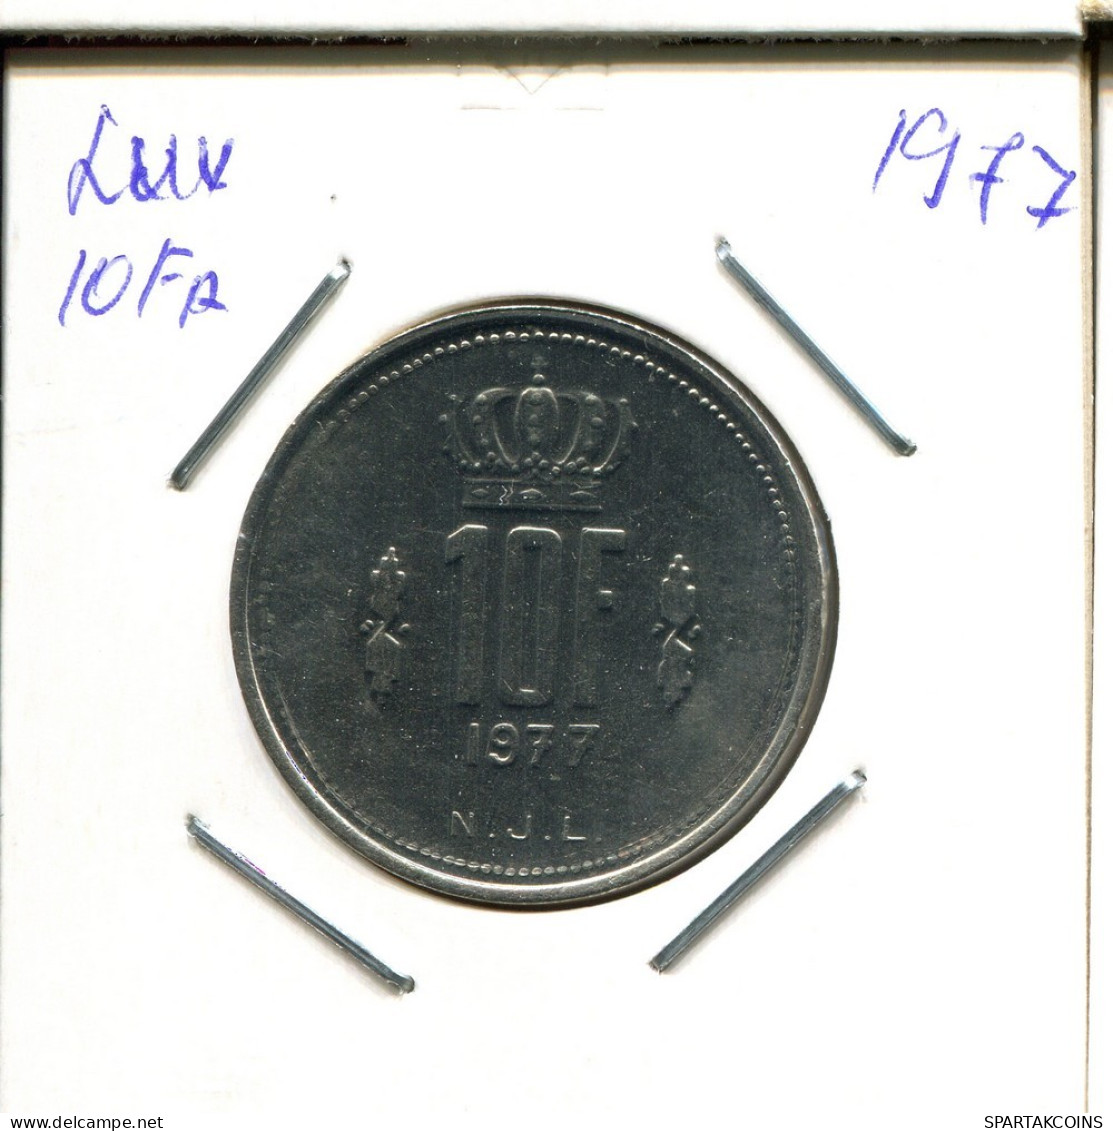 10 FRANCS 1977 LUXEMBOURG Coin #AT242.U.A - Luxembourg